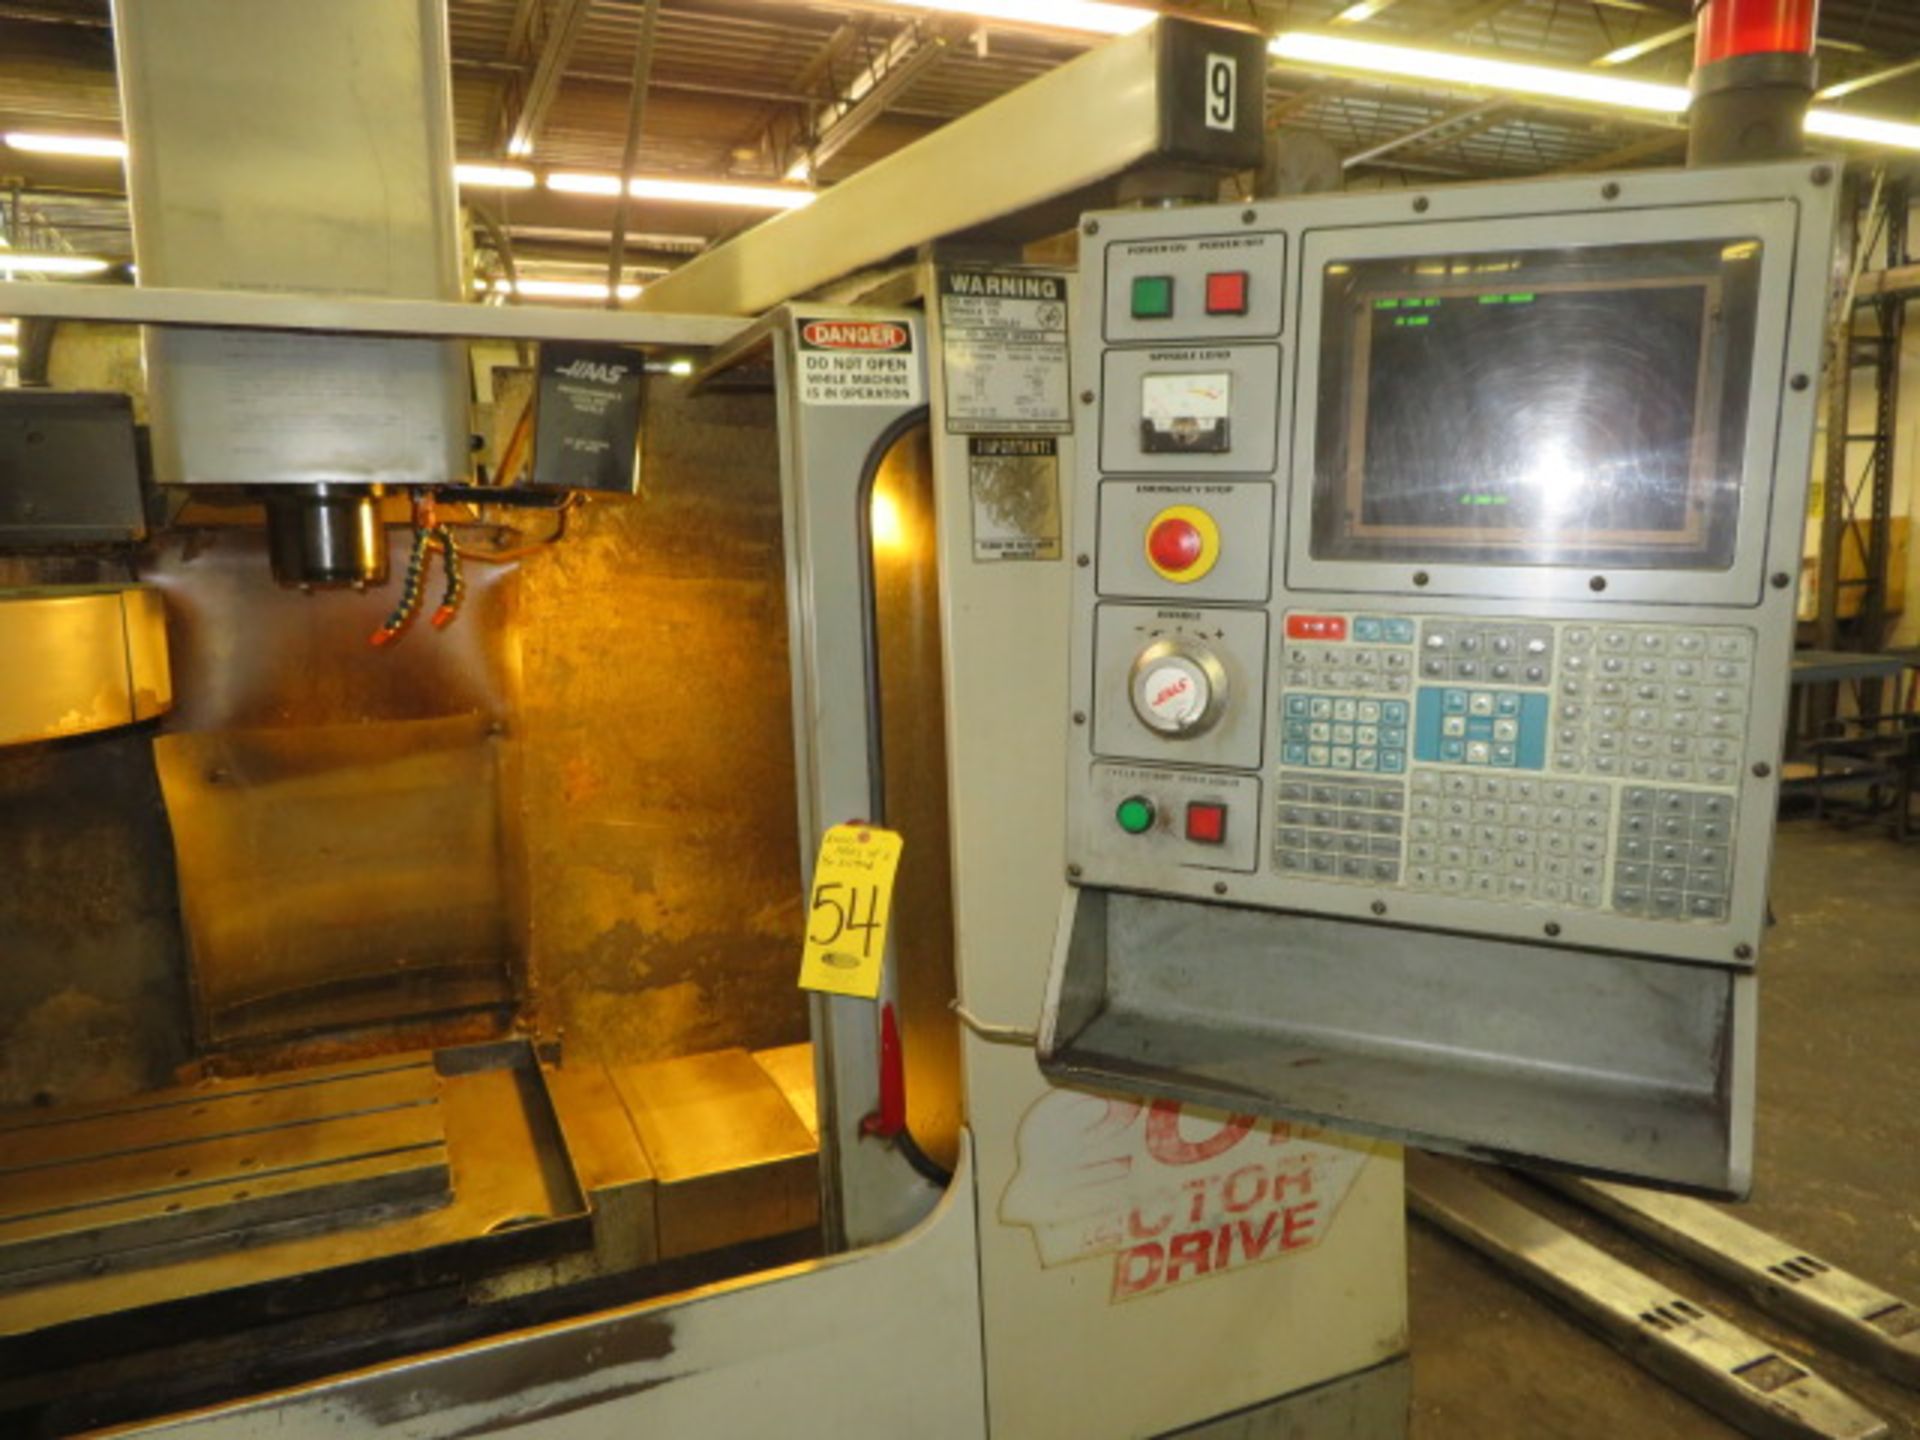 2000 HAAS VF-2 CNC Vertical Machining Center, S/N 20946, HAAS CNC Control, 4TH AXIS ENABLED W DRIVE - Image 2 of 5